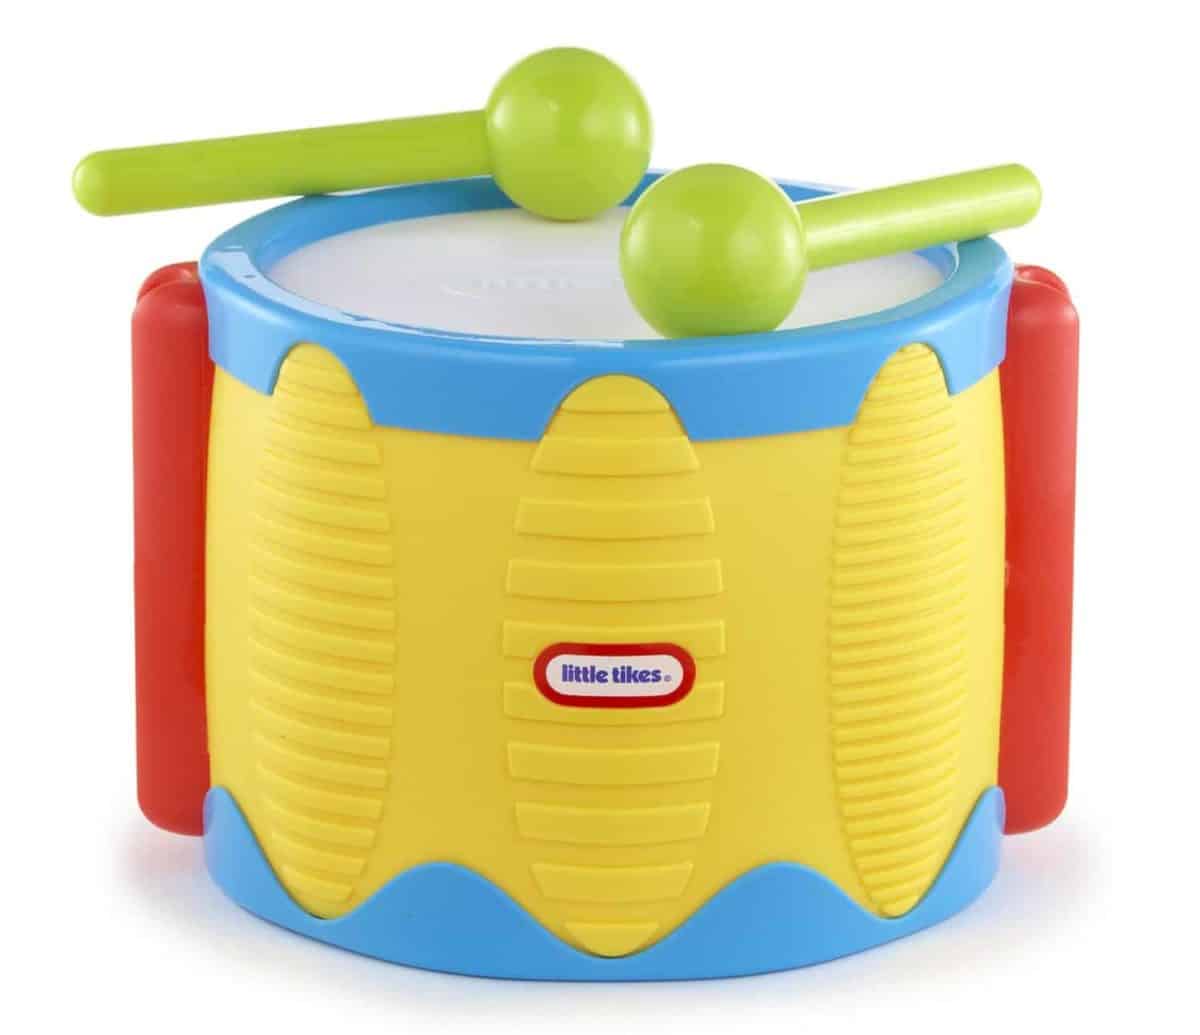 little tikes musical toy for toddler